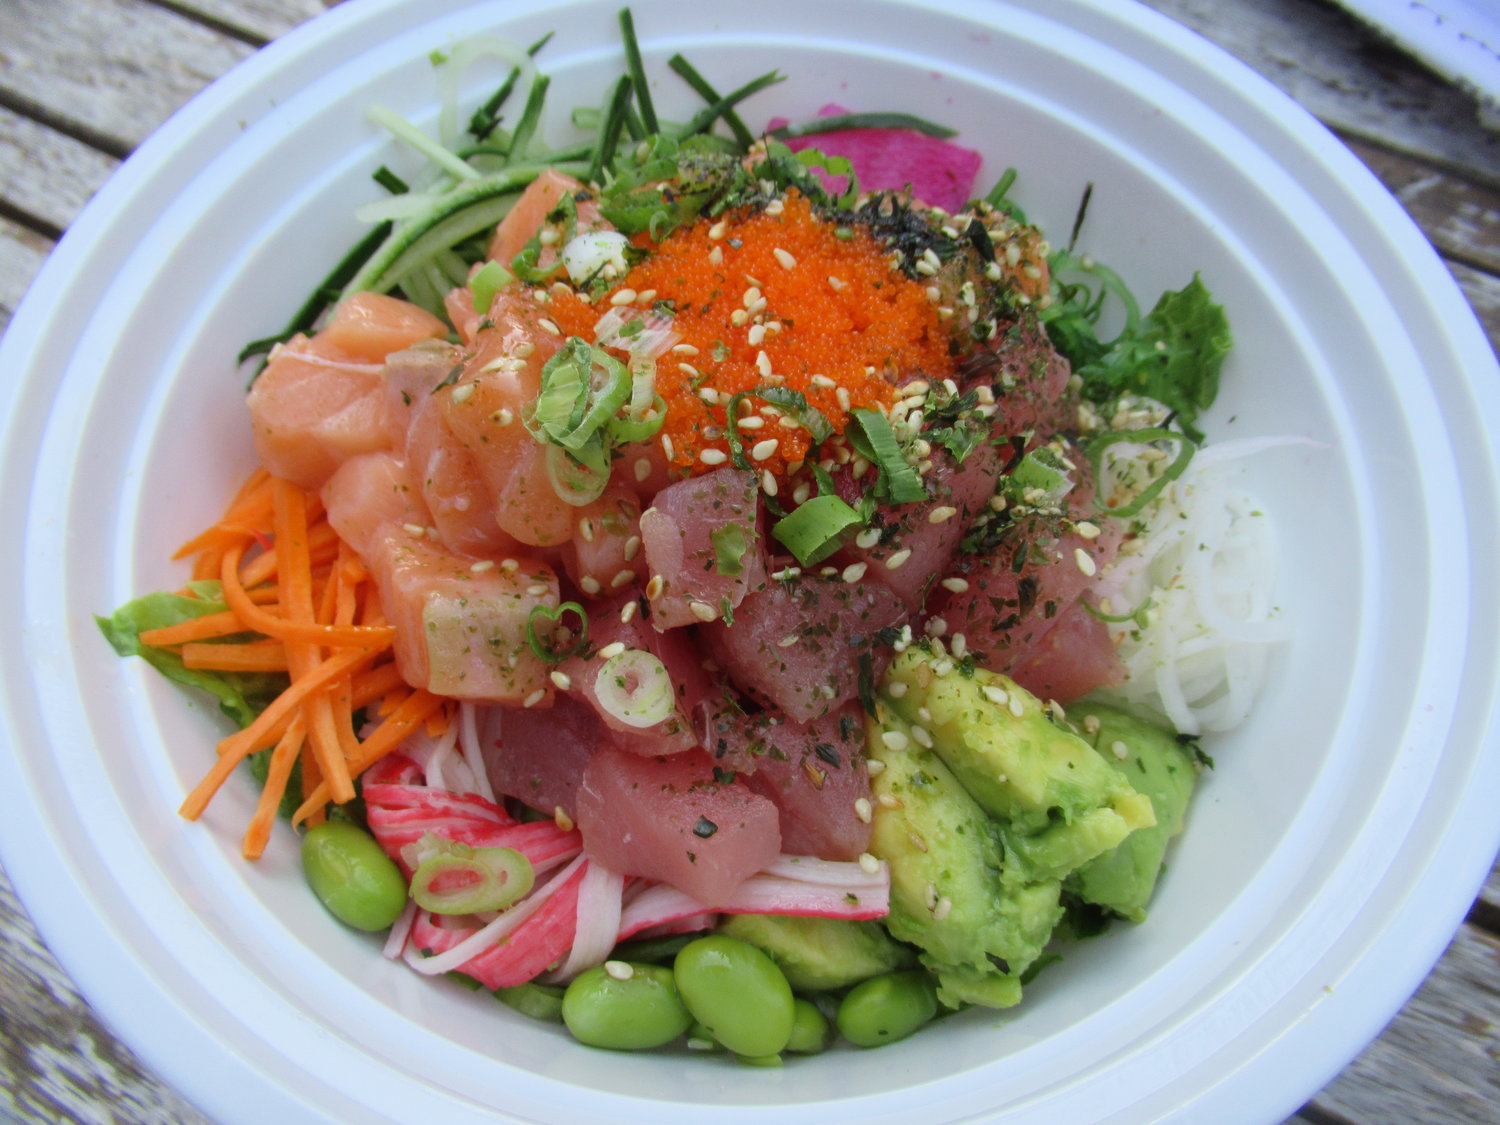 The Deluxe Poke Bowl